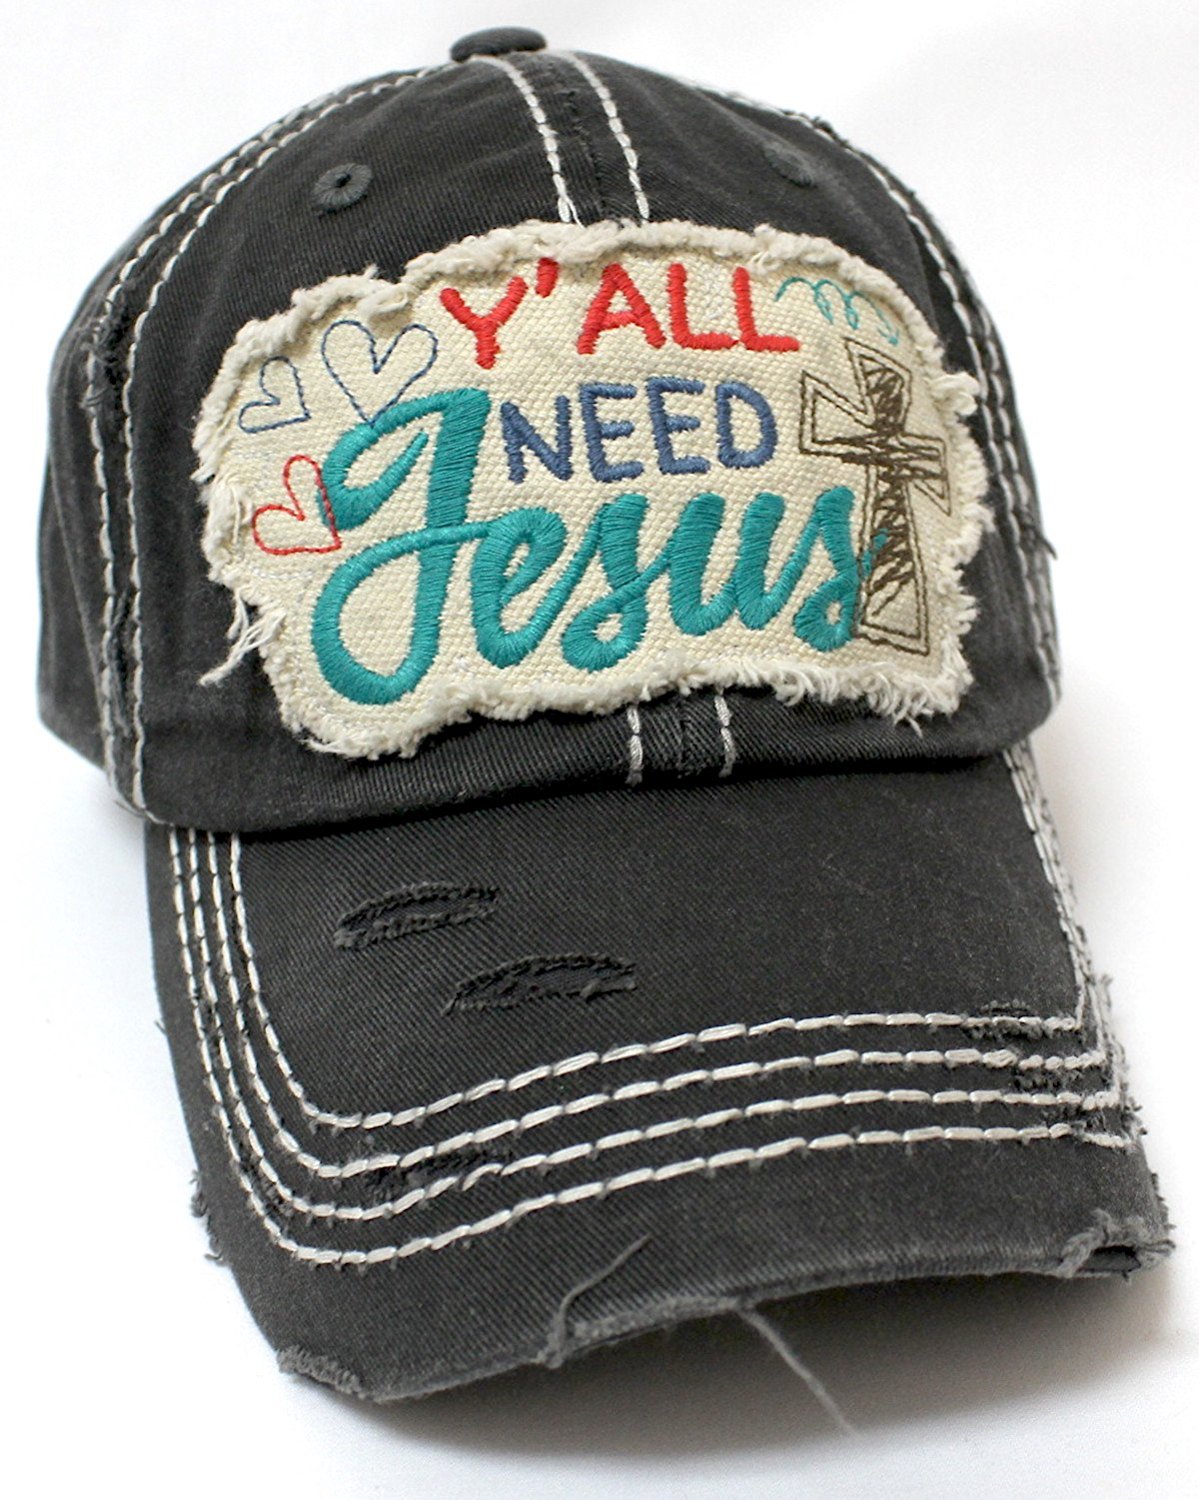 Hearts, Cross, & "Y'all Need Jesus" Patch Embroidery Hat-Black - Caps 'N Vintage 